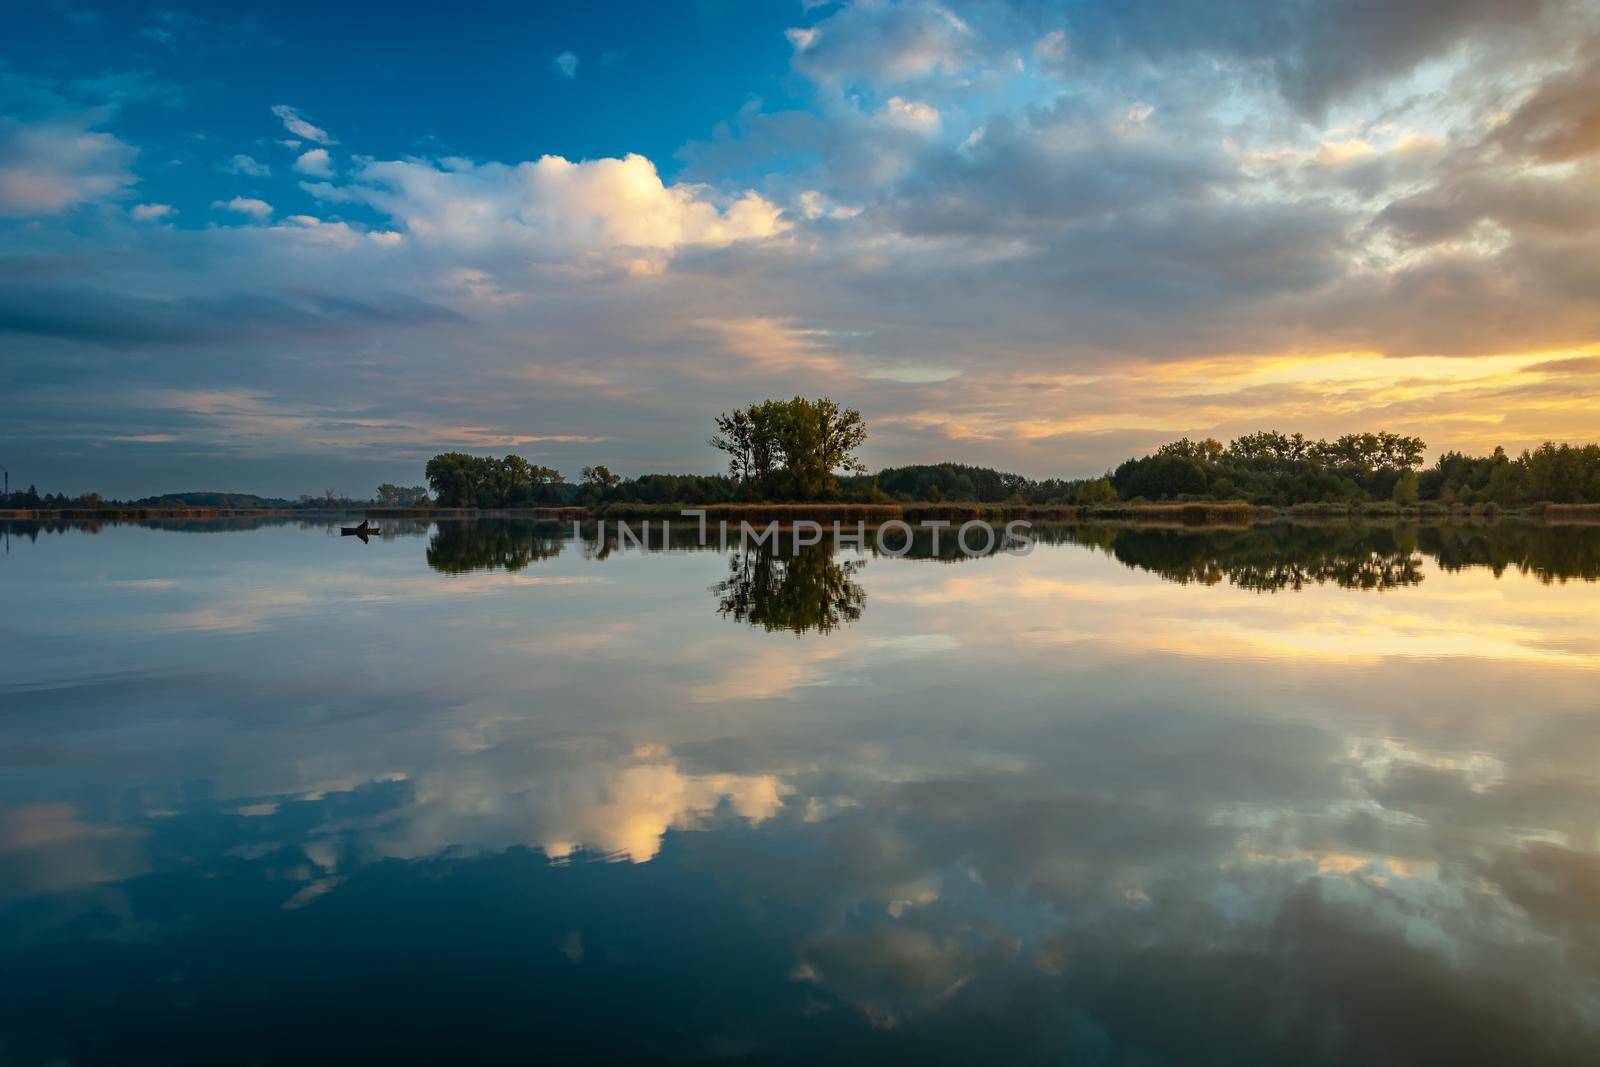 Mirror reflection in the water of evening clouds, Stankow, Poland